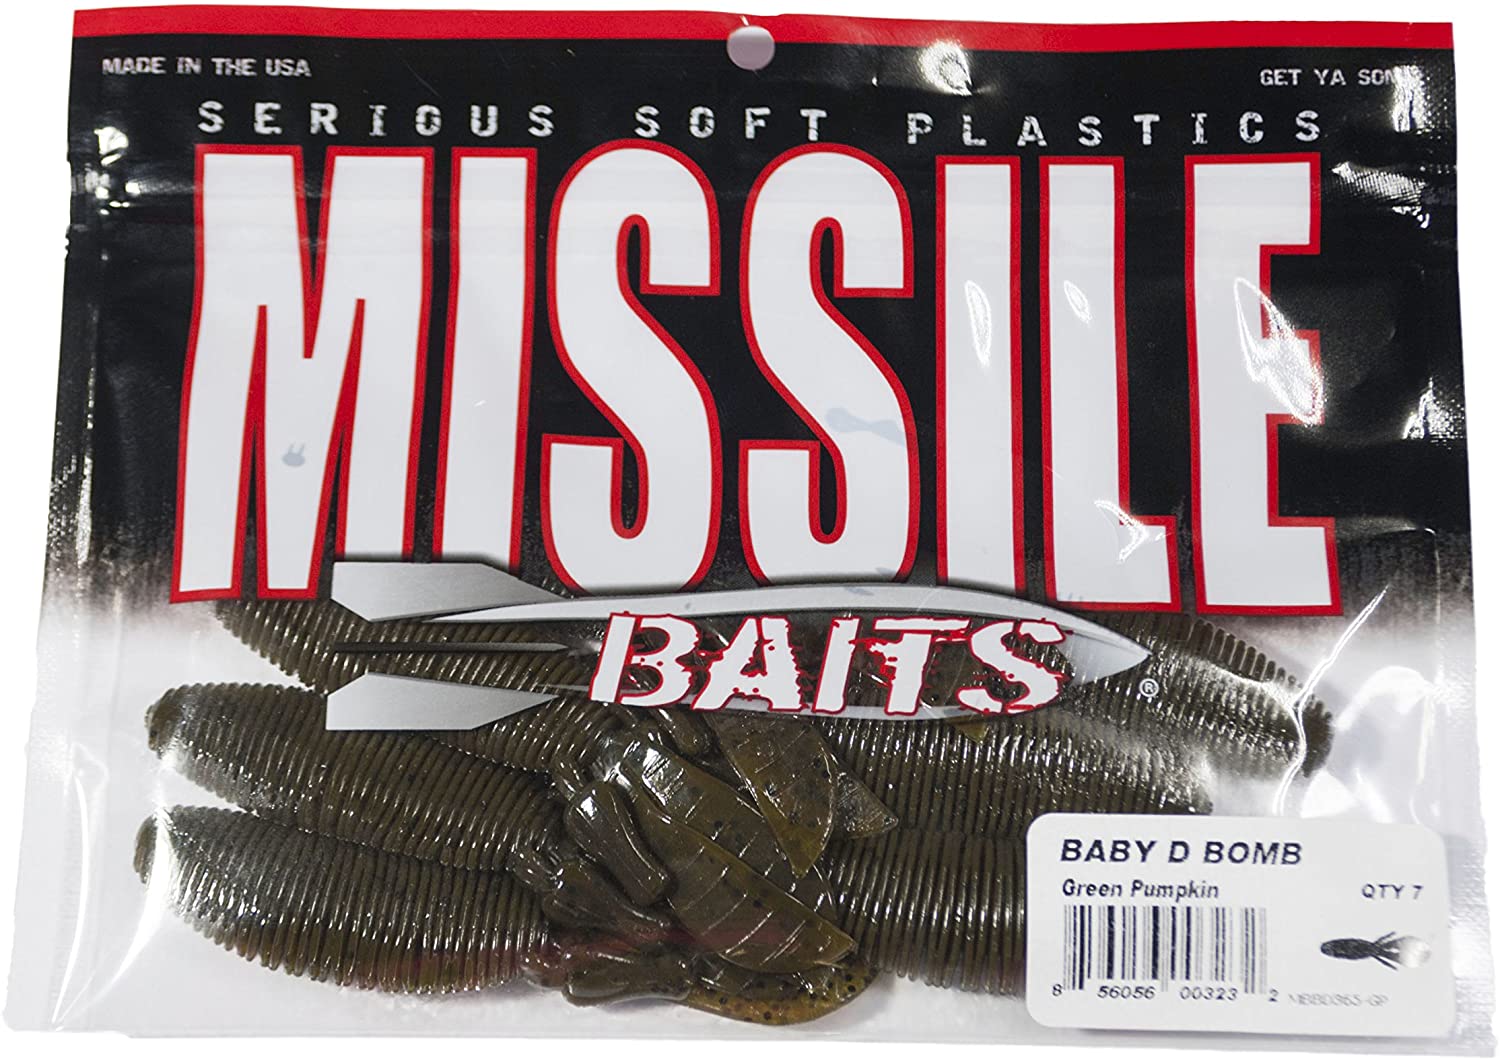 Missile Bait Baby D Bomb Green Pumpkin 7pk - image 2 of 2